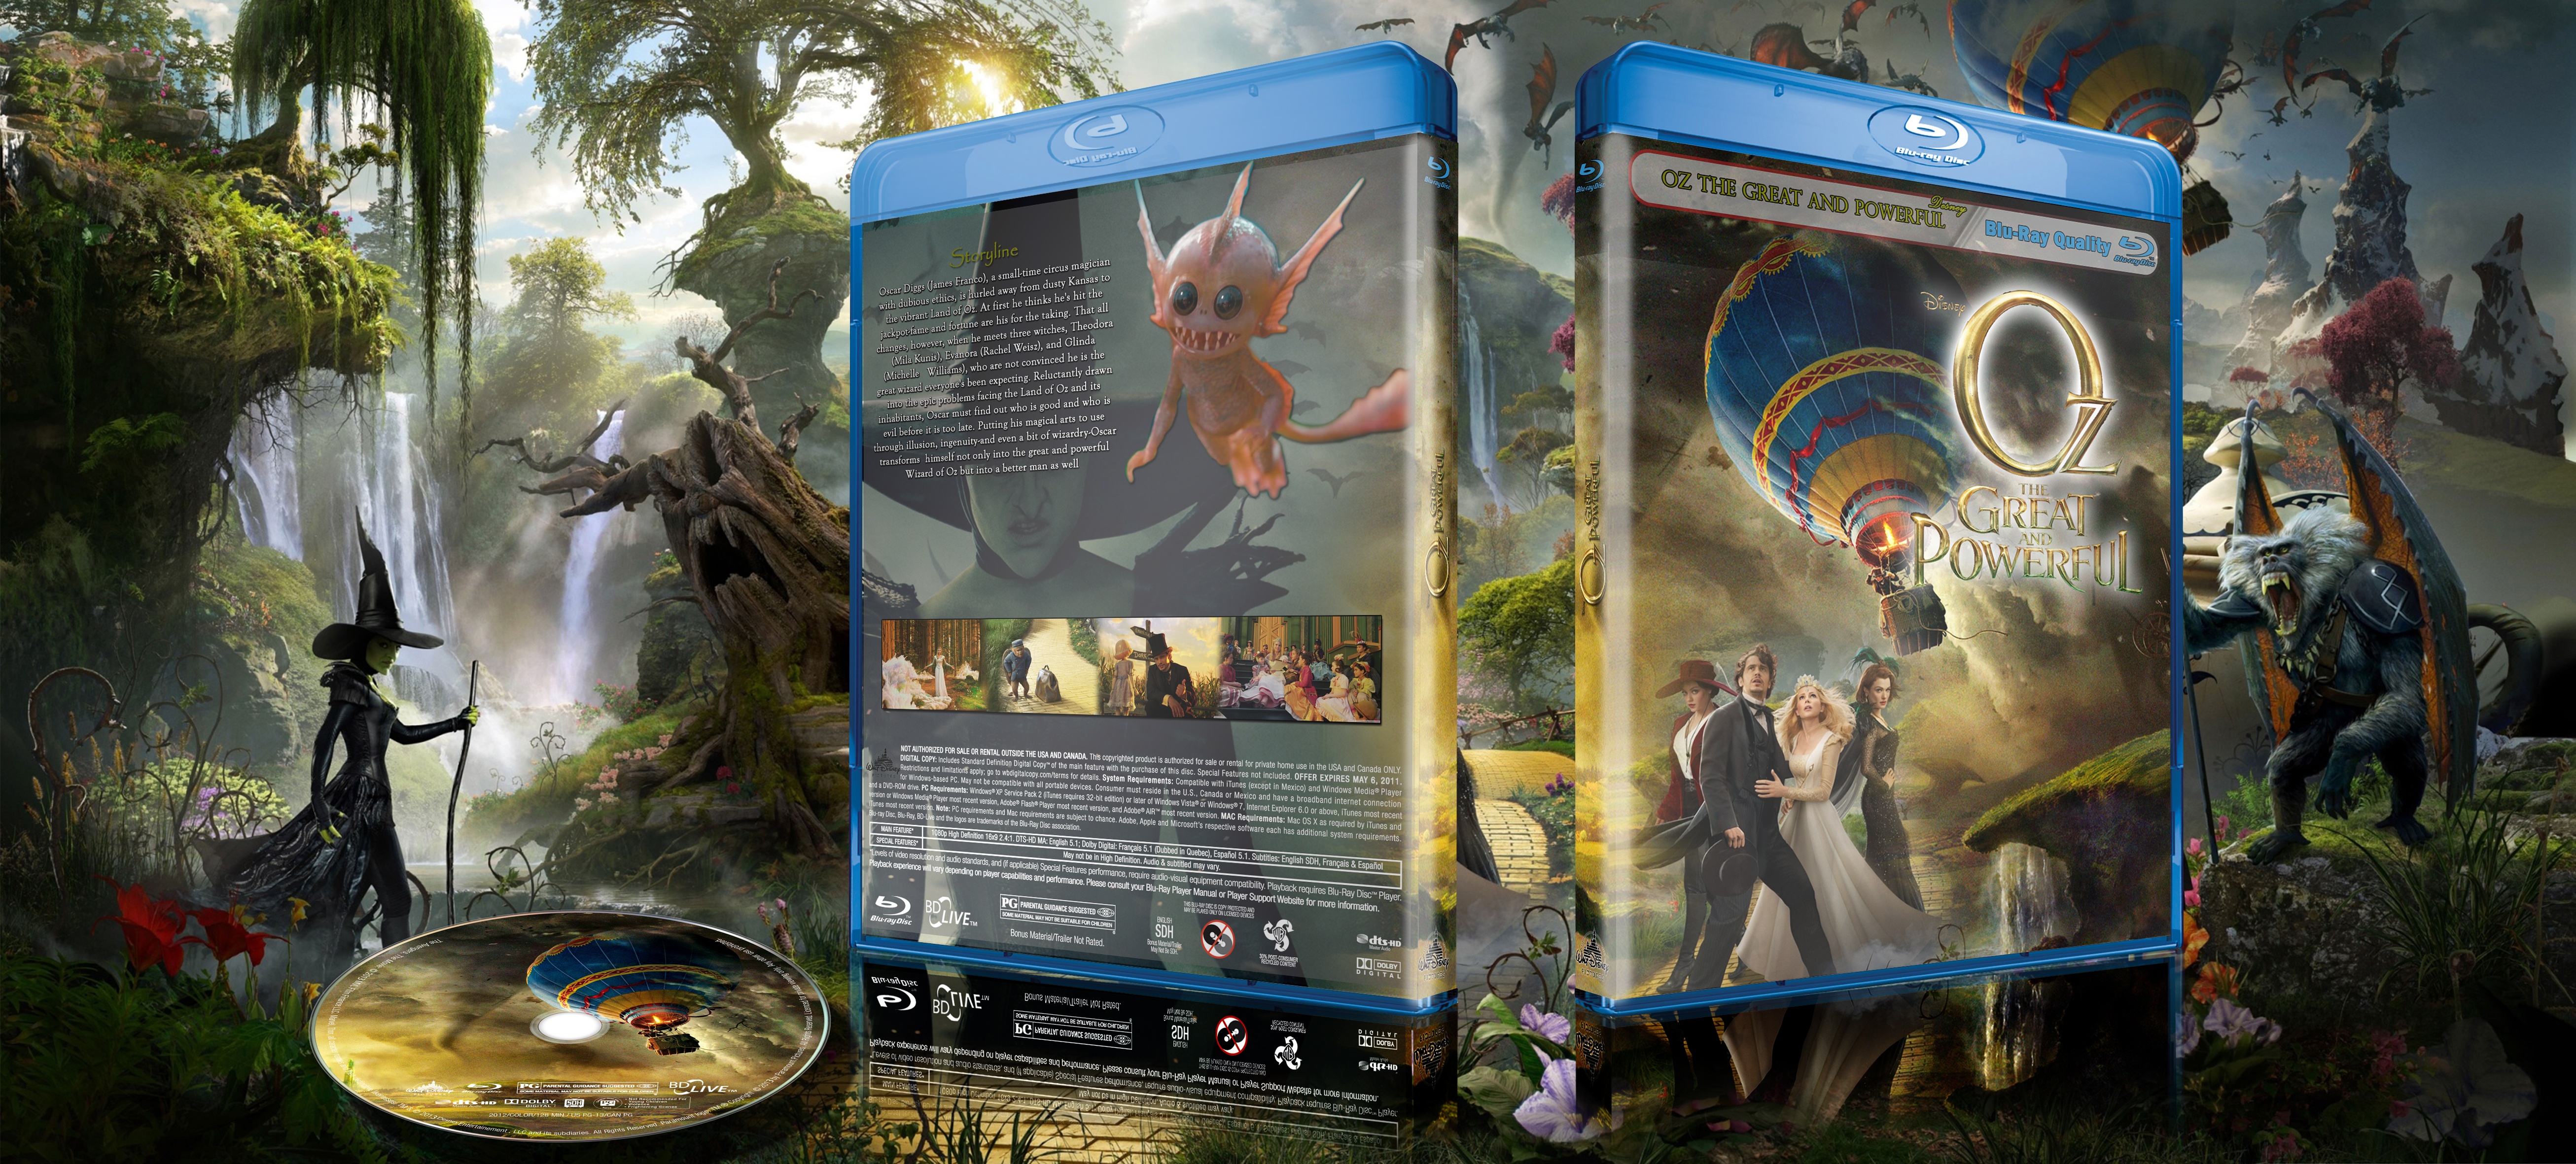 Oz the Great and Powerful 2013 box cover